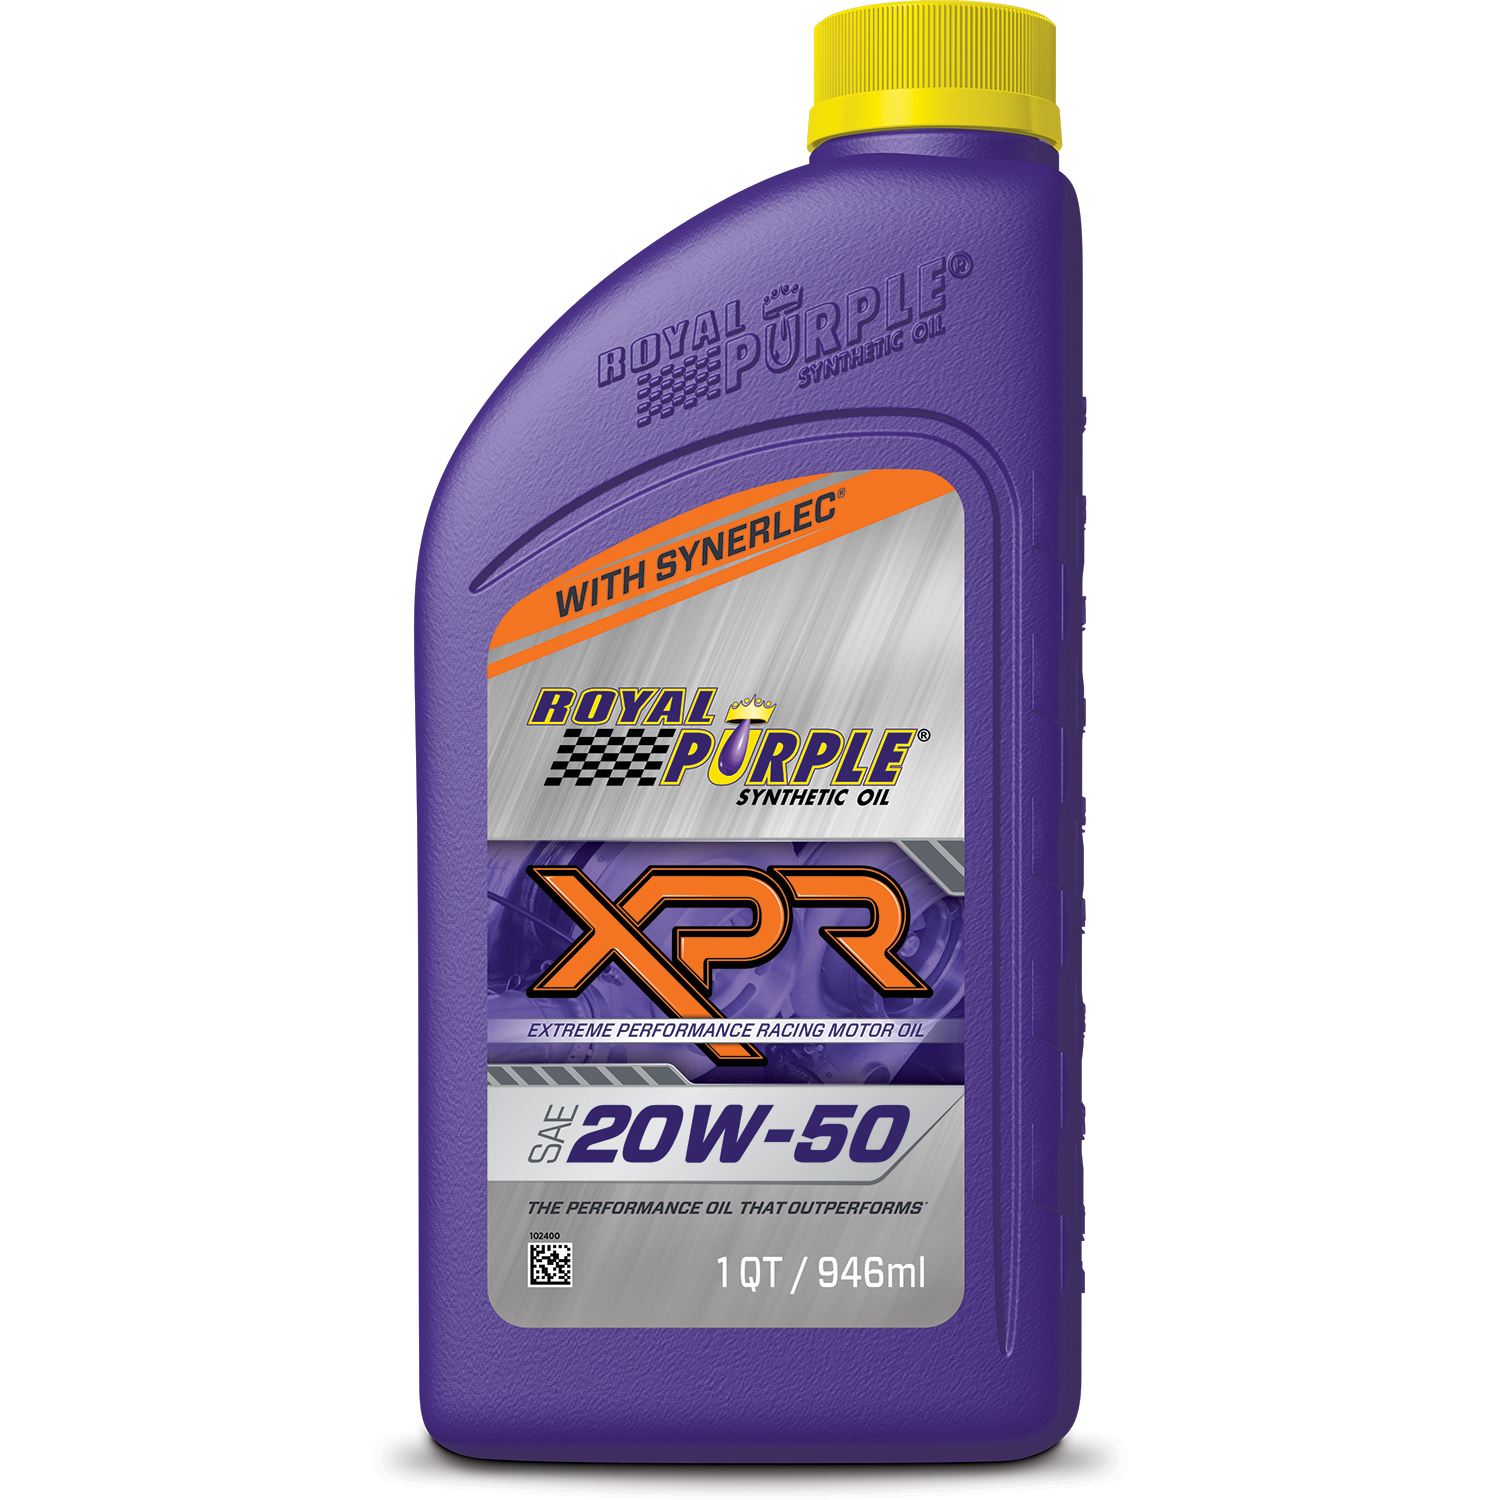 ROYAL PURPLE Motor Oil Extreme Performance Racing 20W50 Synthetic 1 qt Bottle Ea